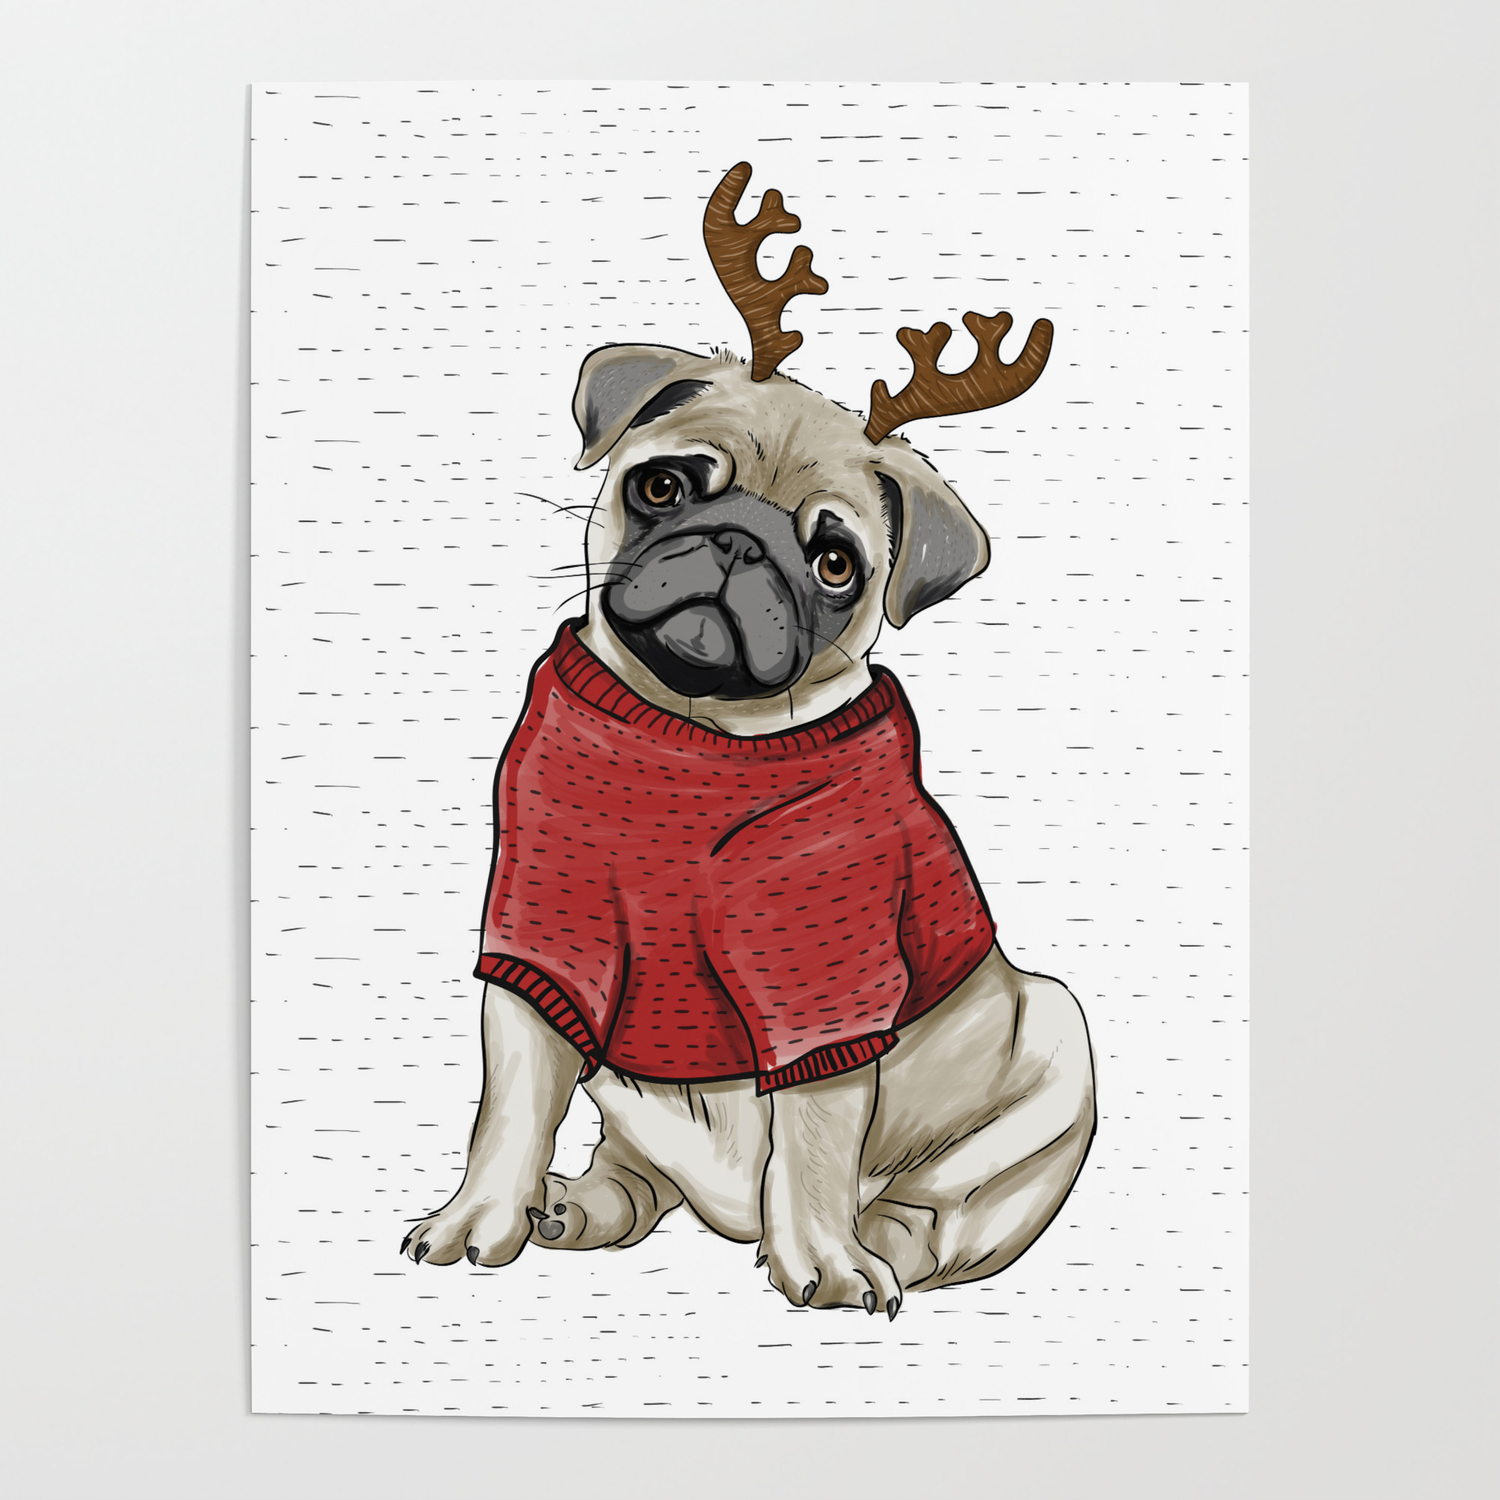 The Pug Who Wanted to Be A Reindeer